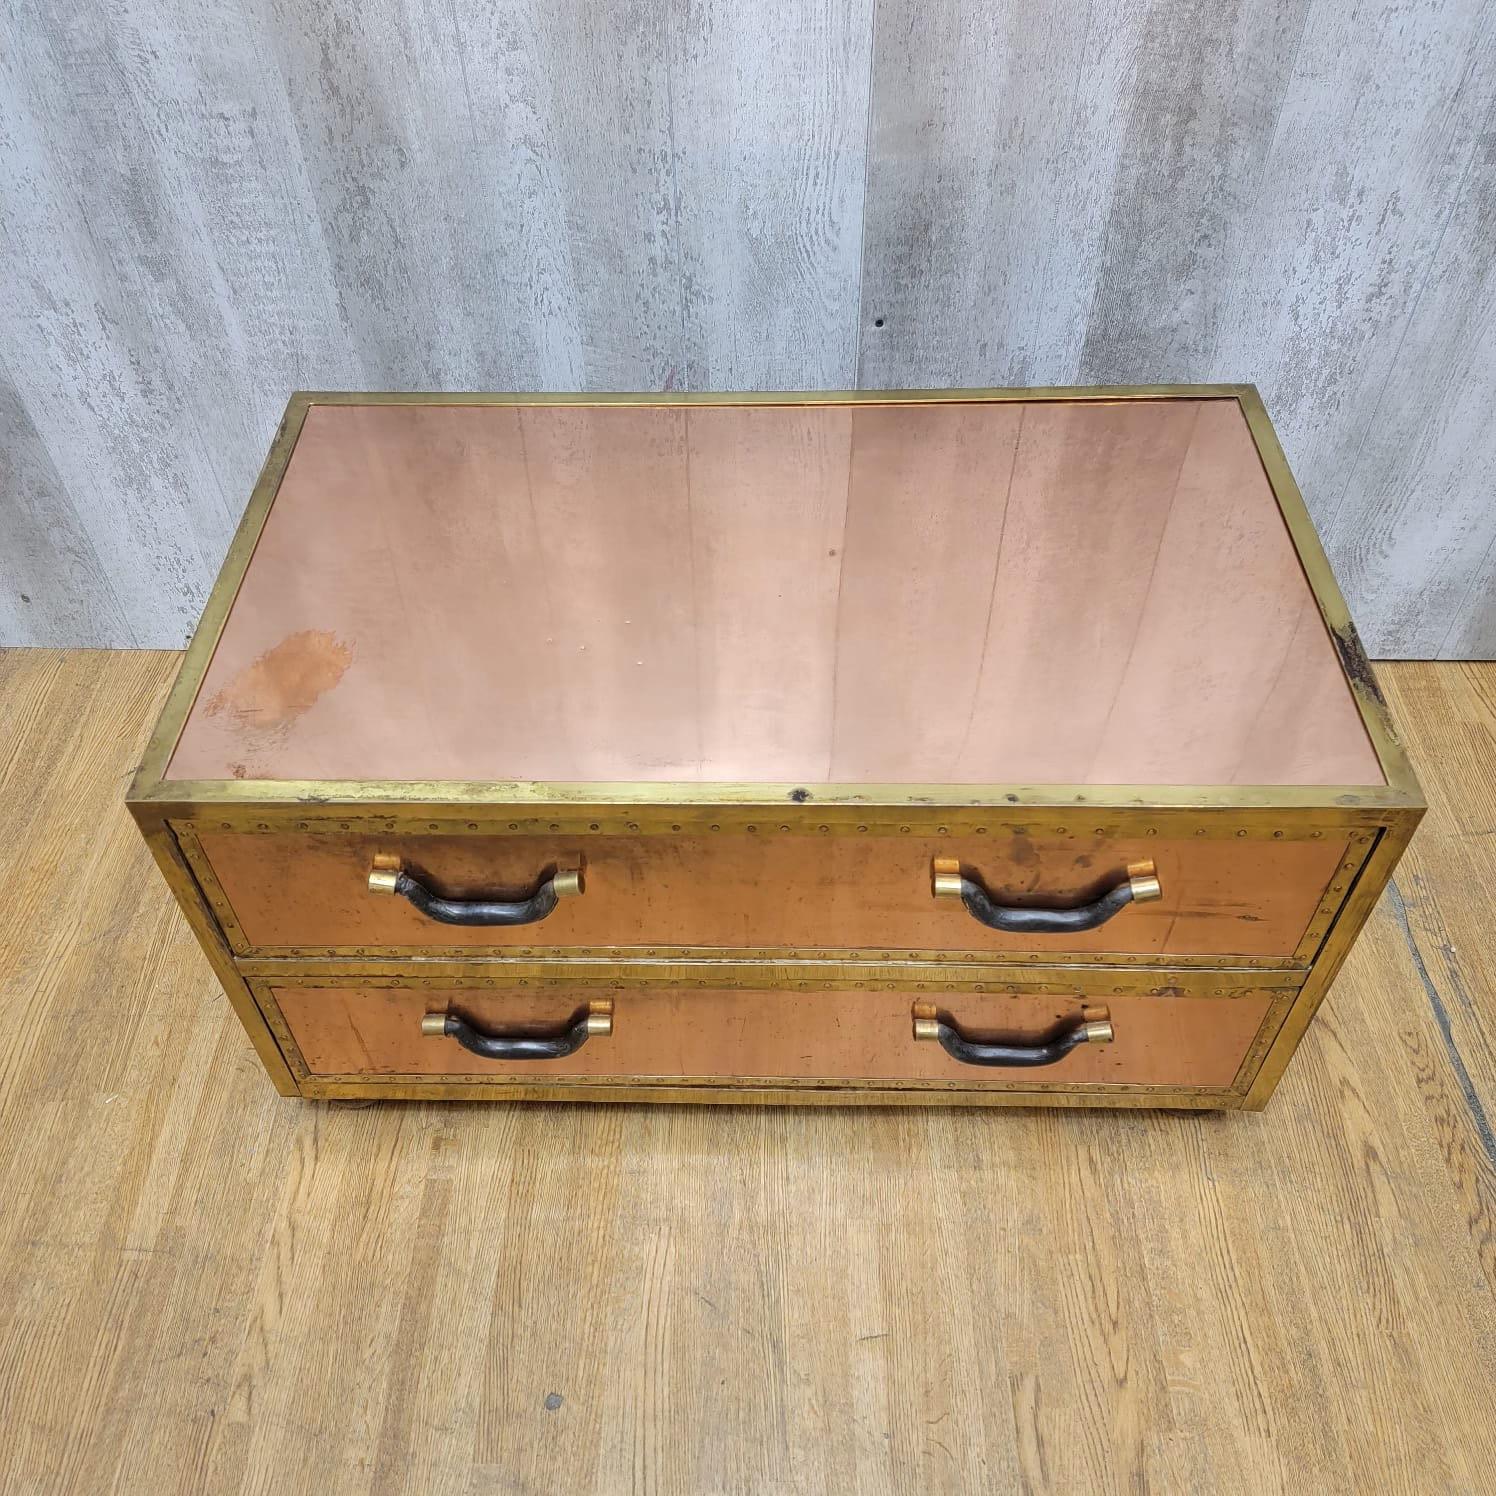 Vintage Copper Trunk Style Coffee Table with Leather Handles 1